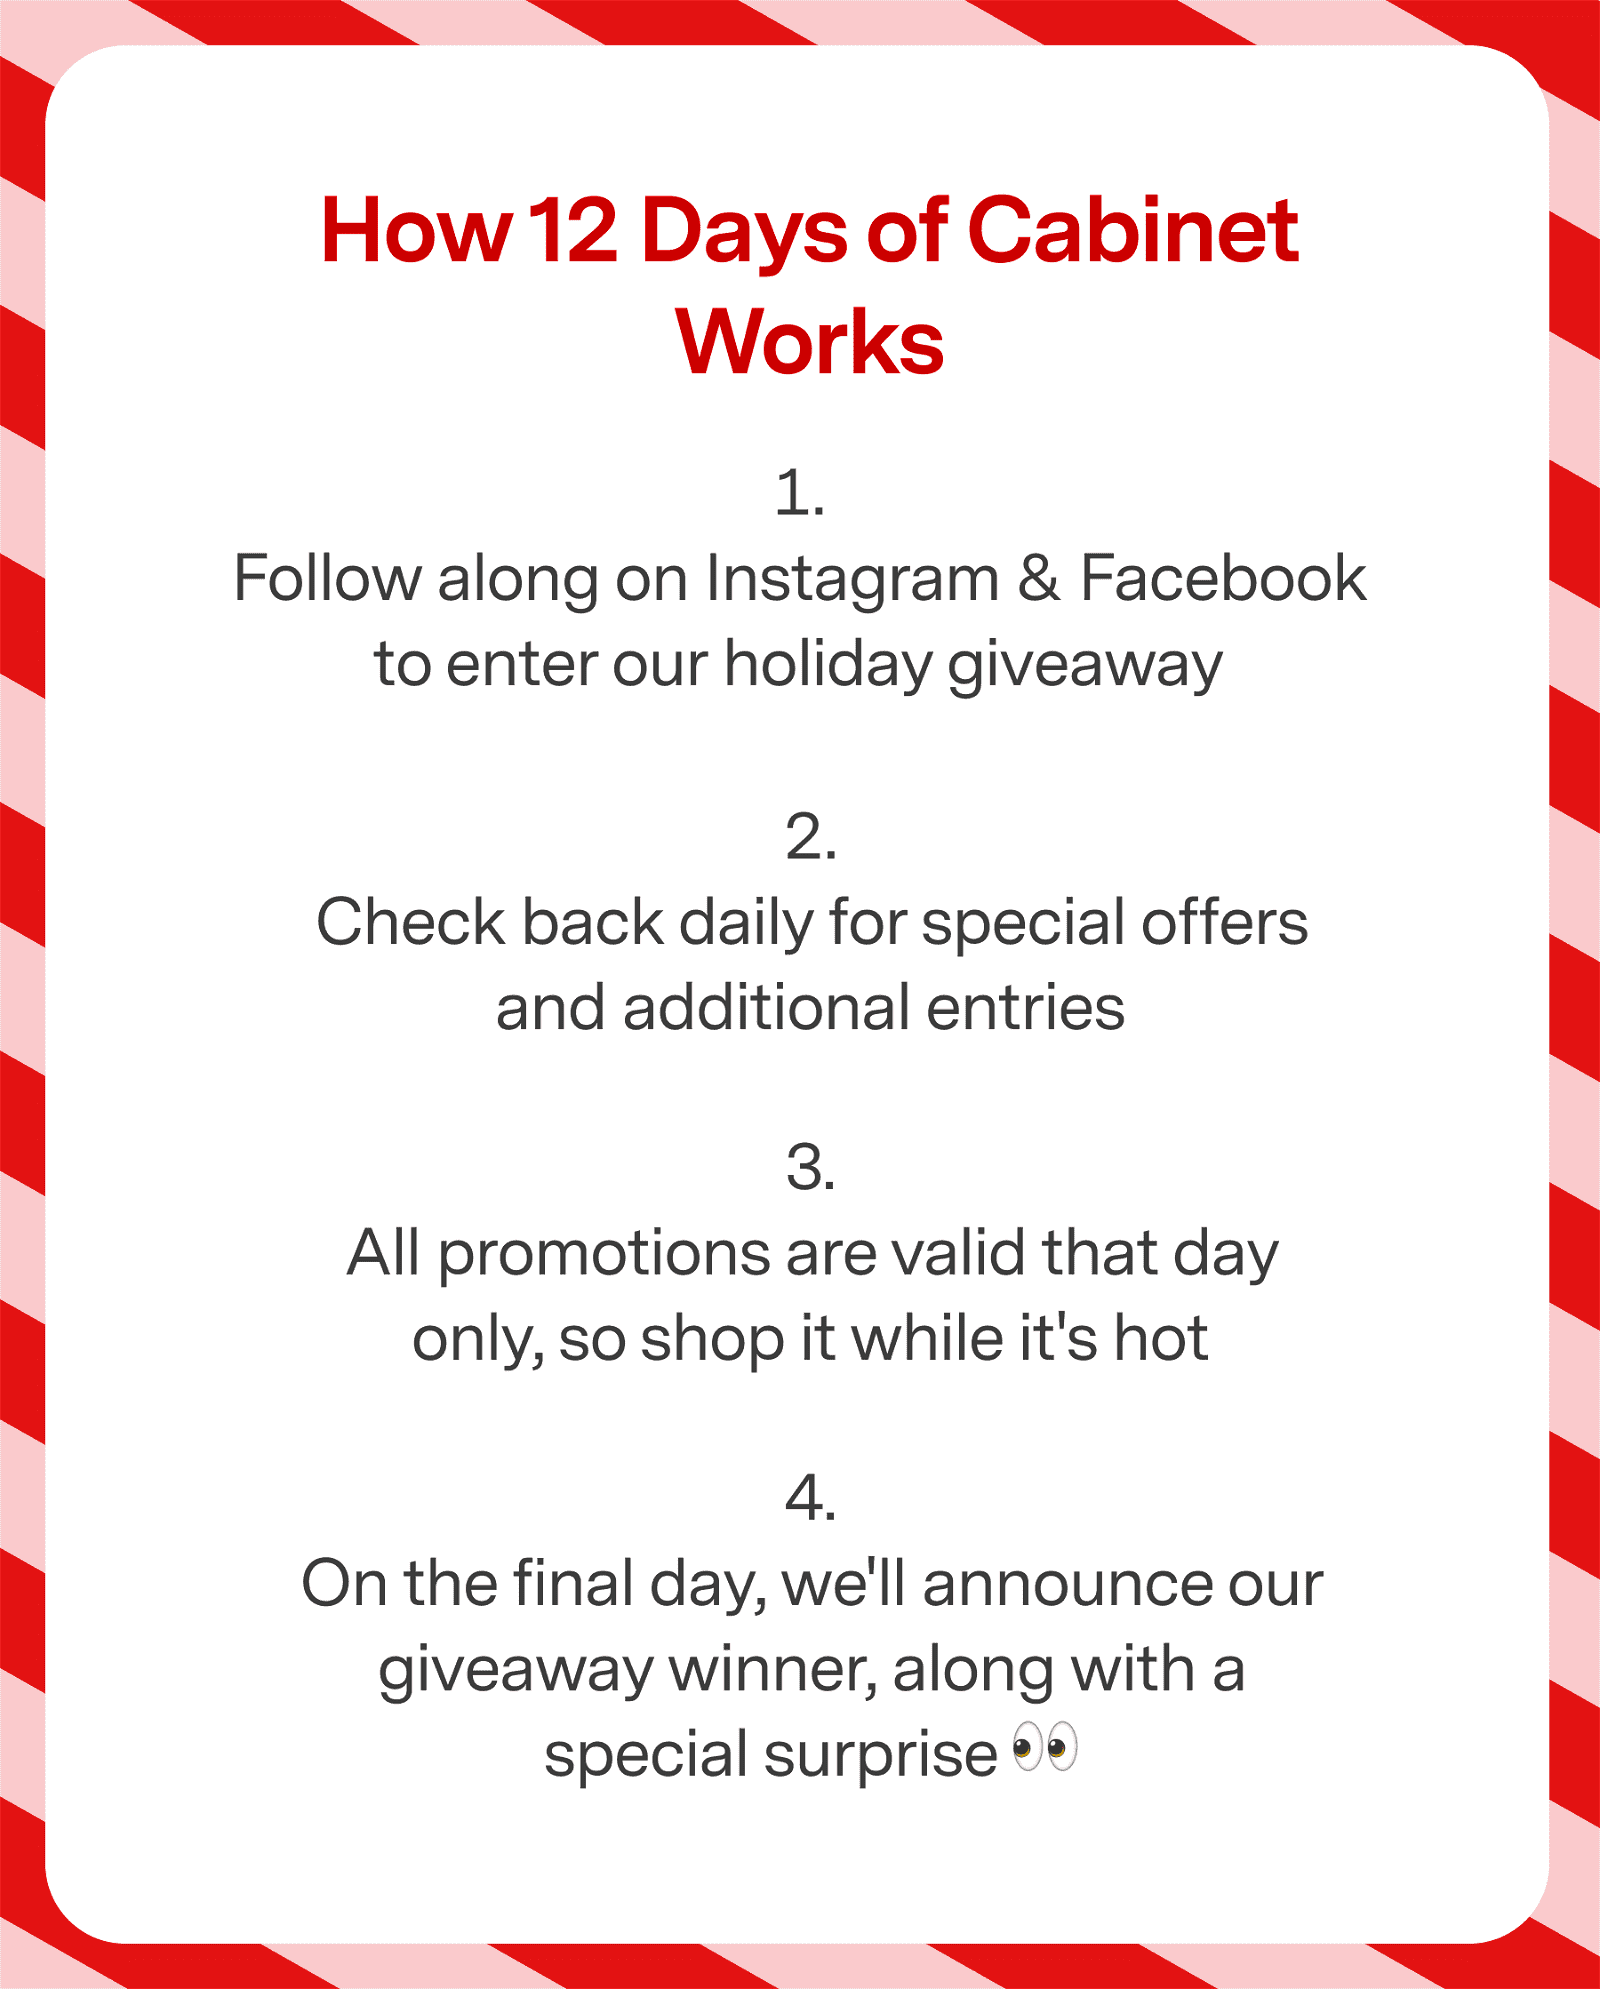 Follow along on Instagram and Facebook to enter our holiday giveaway. Check back daily for special offers and additional entries. All promotions are valid that day only, so shop while it's hot. On the final day, we'll announce our giveaway winner, along with a special surprise!